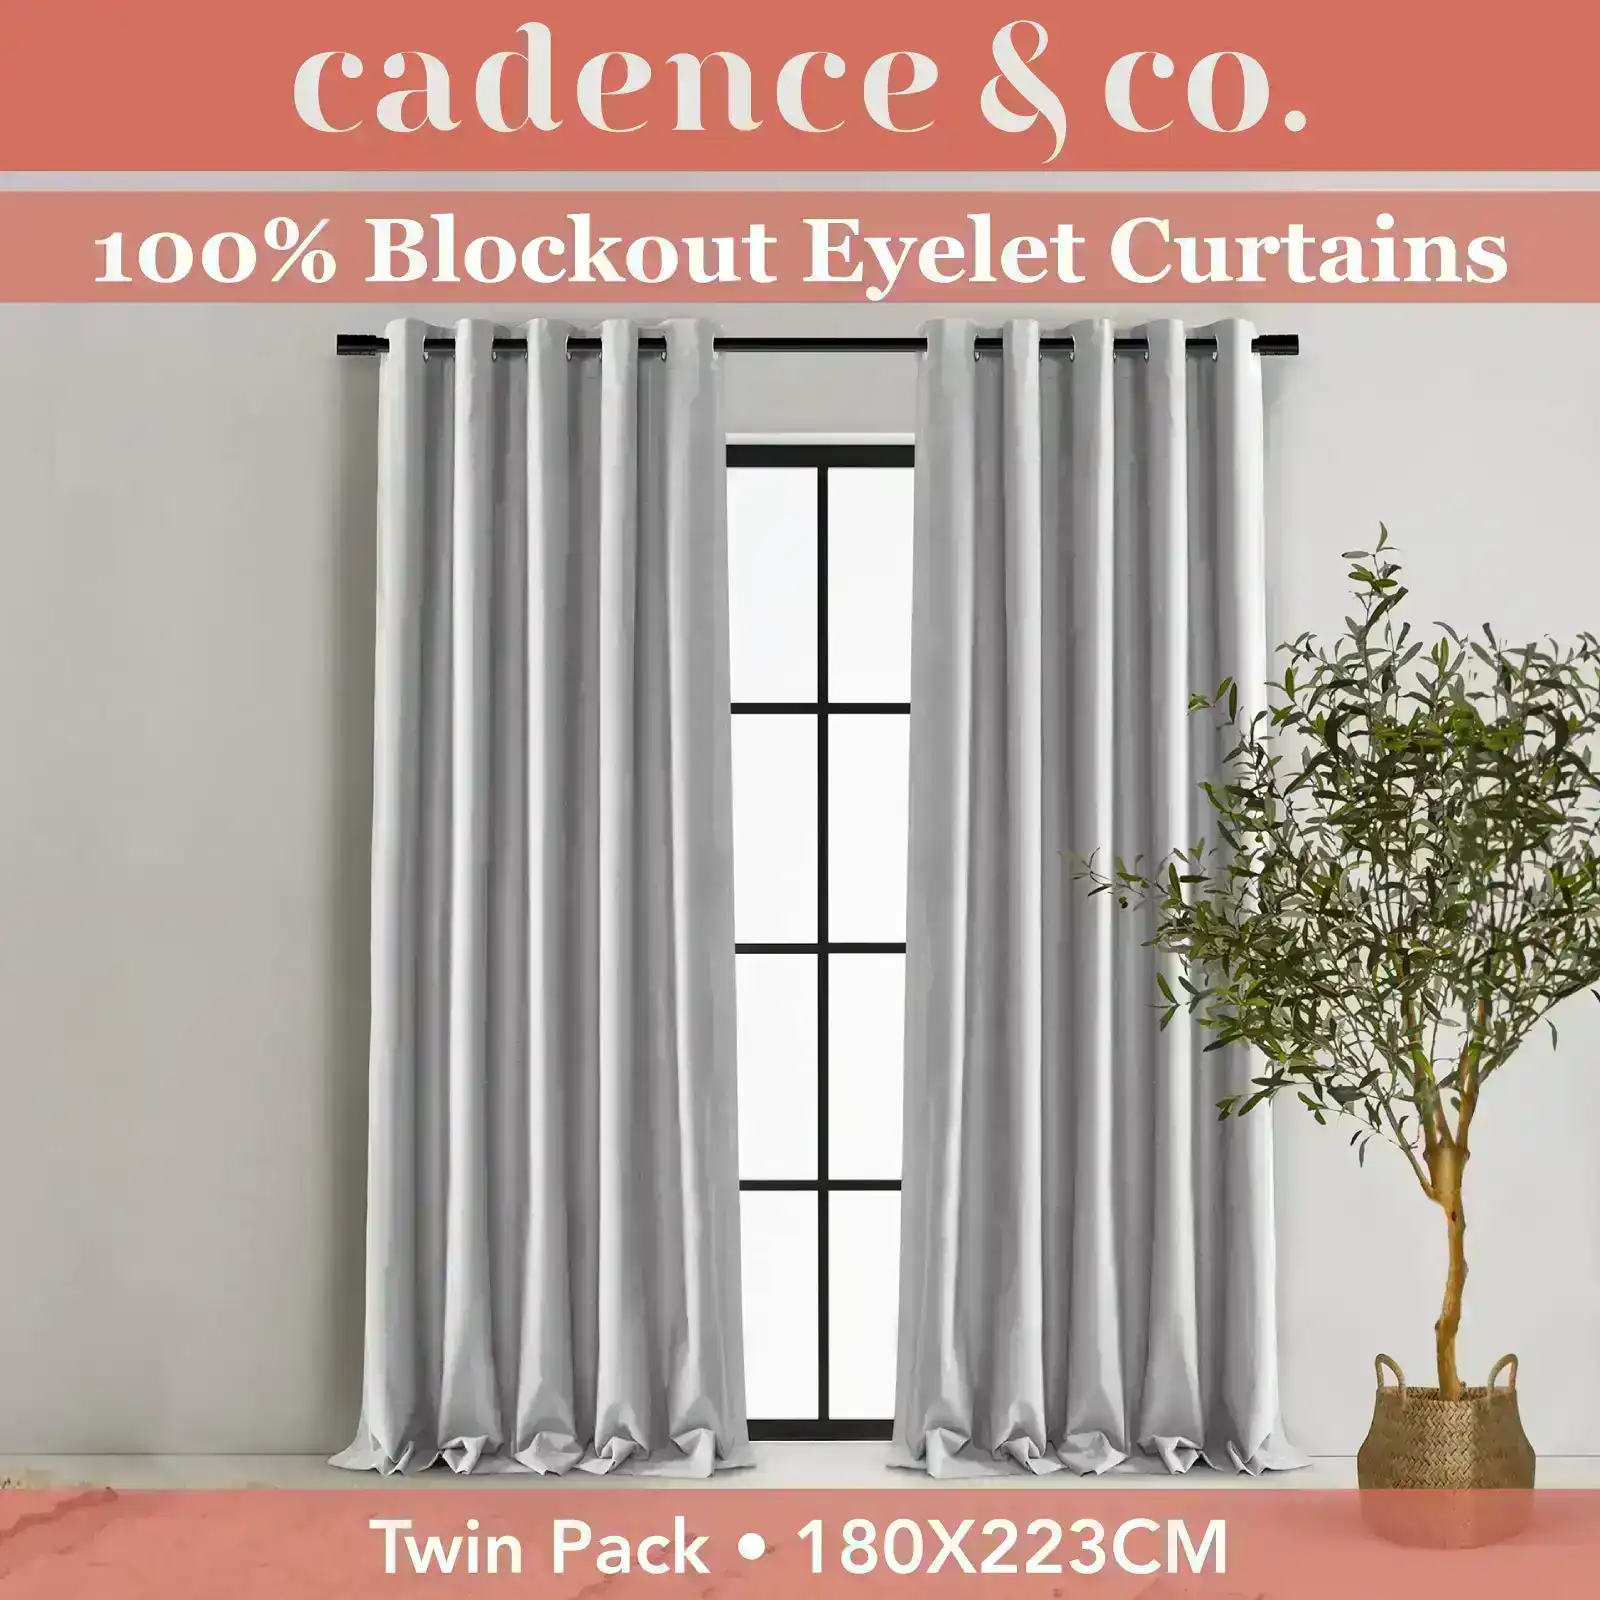 Cadence & Co Byron Matte Velvet 100% Blockout Eyelet Curtains Twin Pack Silver 180x223cm